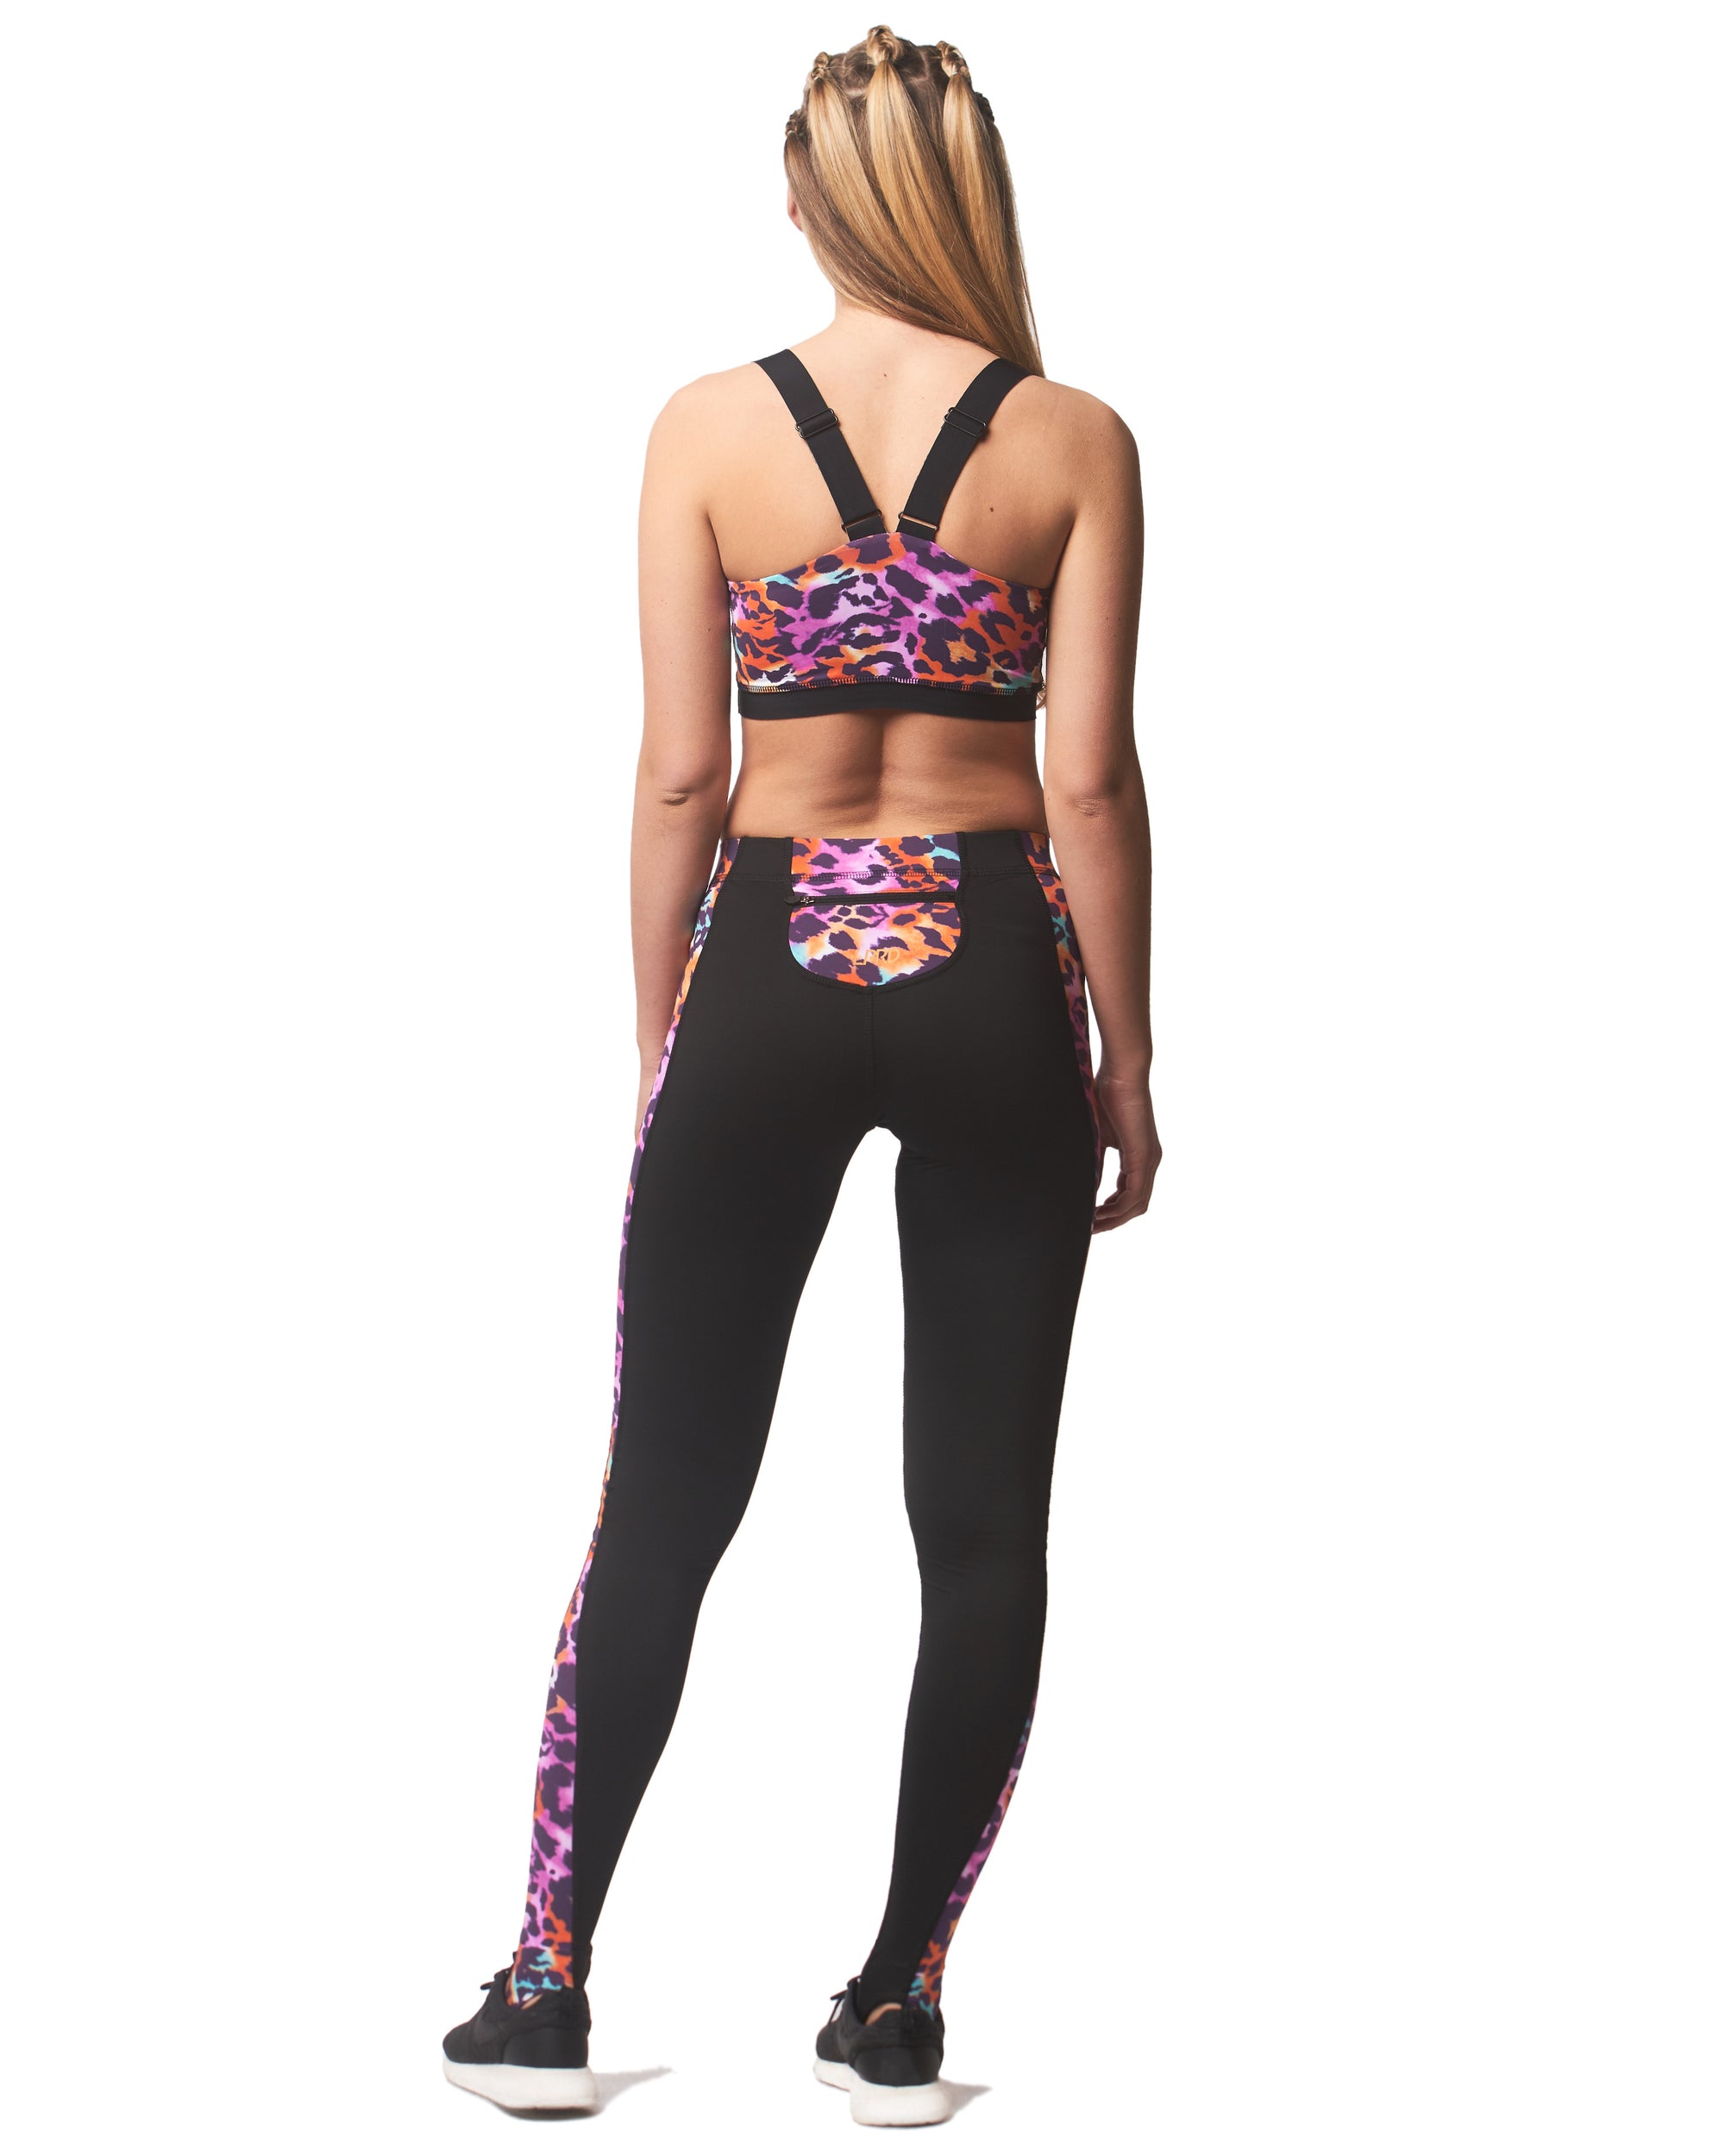 Sports leggings - Black with colourful pink leopard print - Stylish and  flattering performance tights for yoga, running, cycling and active sports  - LPRD